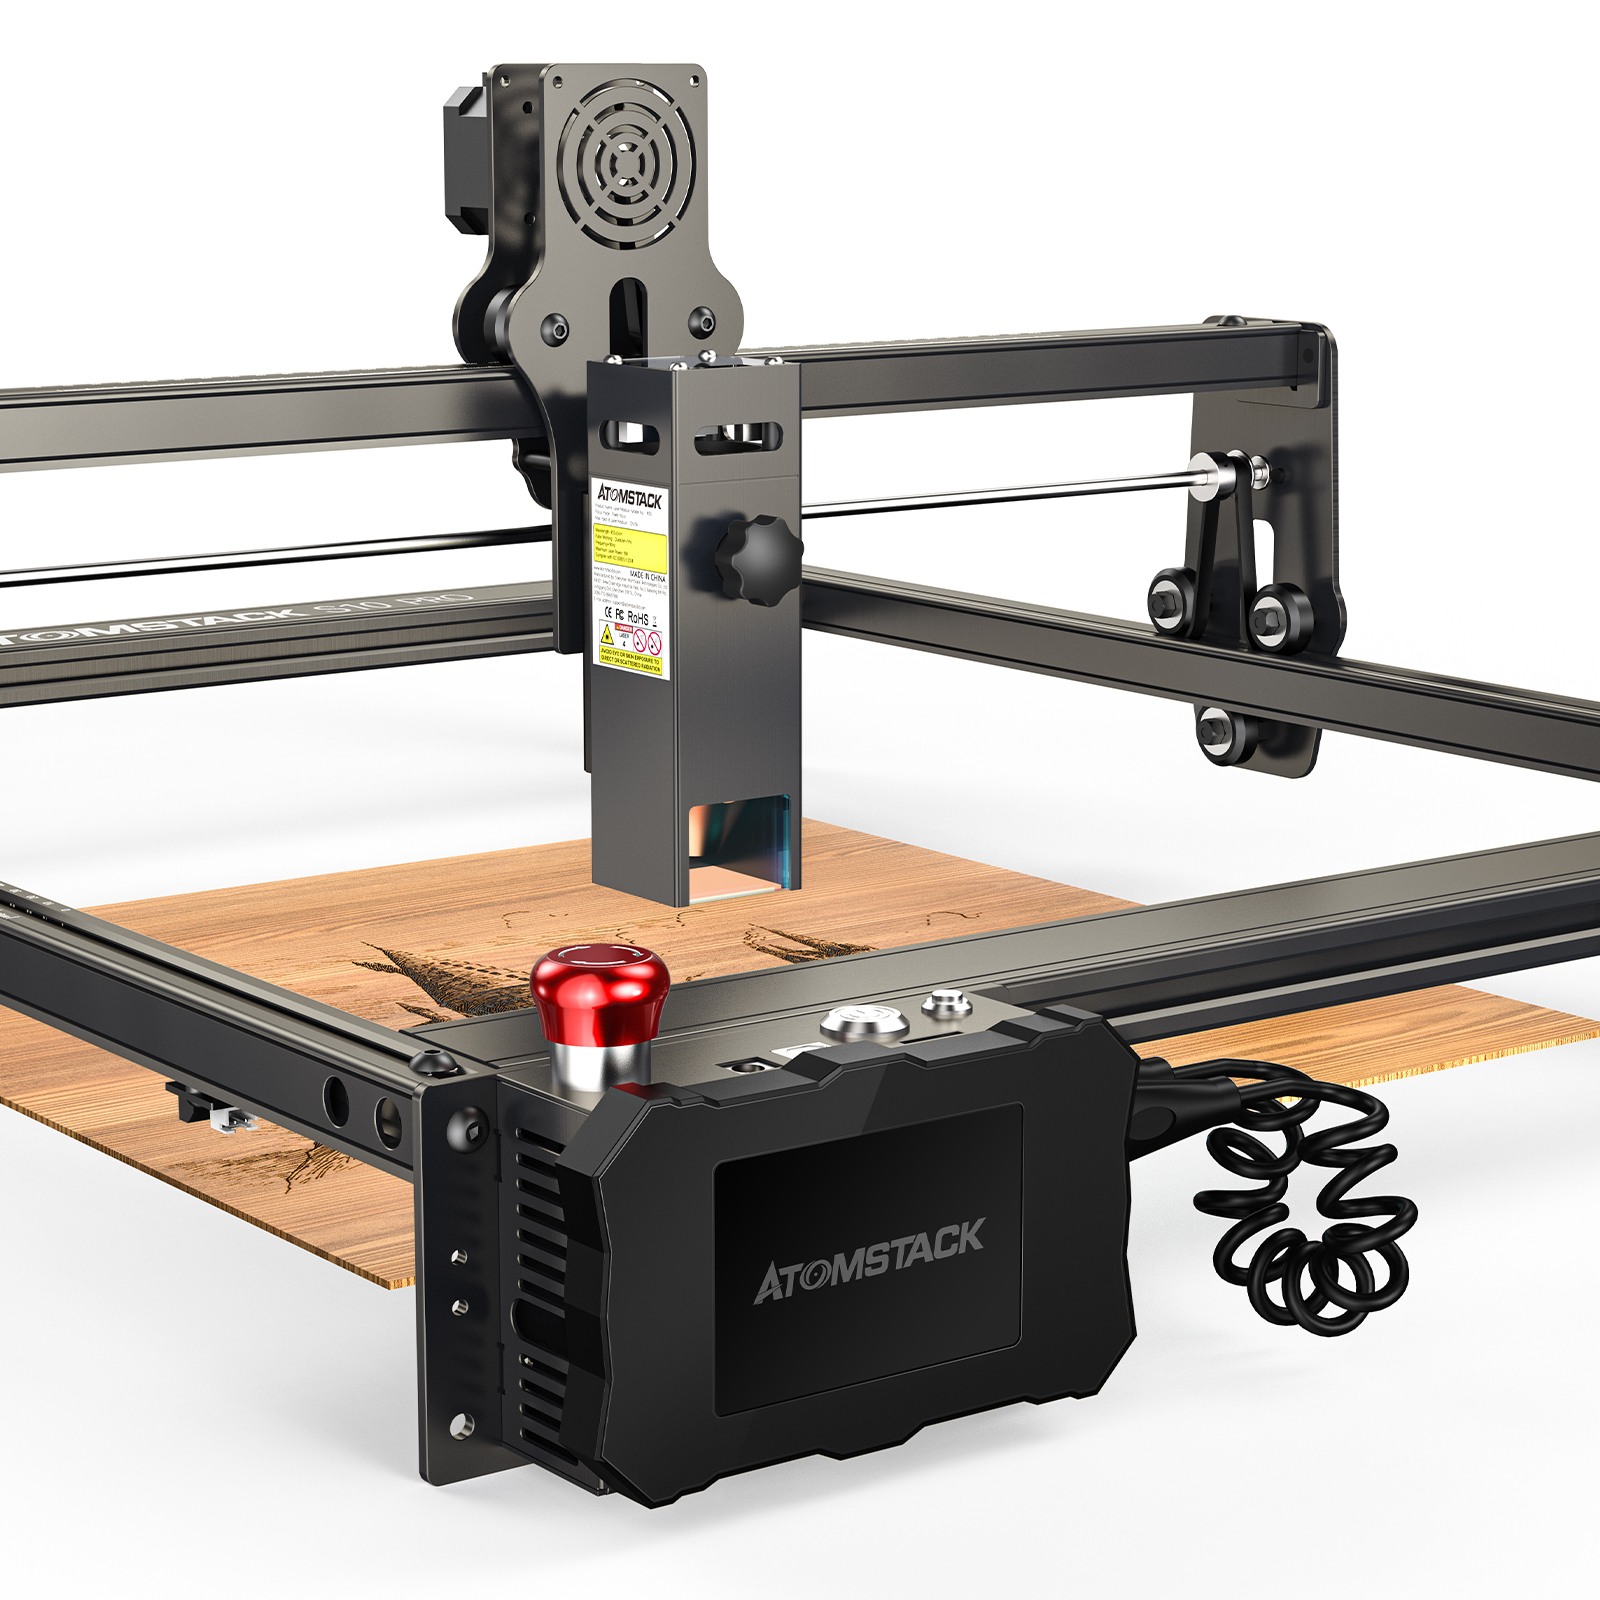 Find New ATOMSTACK S10 PRO Flagship Dual-Laser Laser Engraving Cutting Machine Support Offline Engraving Laser Engraver Cutter 10W Output Power Fixed-Focus 304 Mirror Stainless Steel Engraving Metal Acrylic Leather 20mm Wood Cutter DIY Engraver for Sale on Gipsybee.com with cryptocurrencies